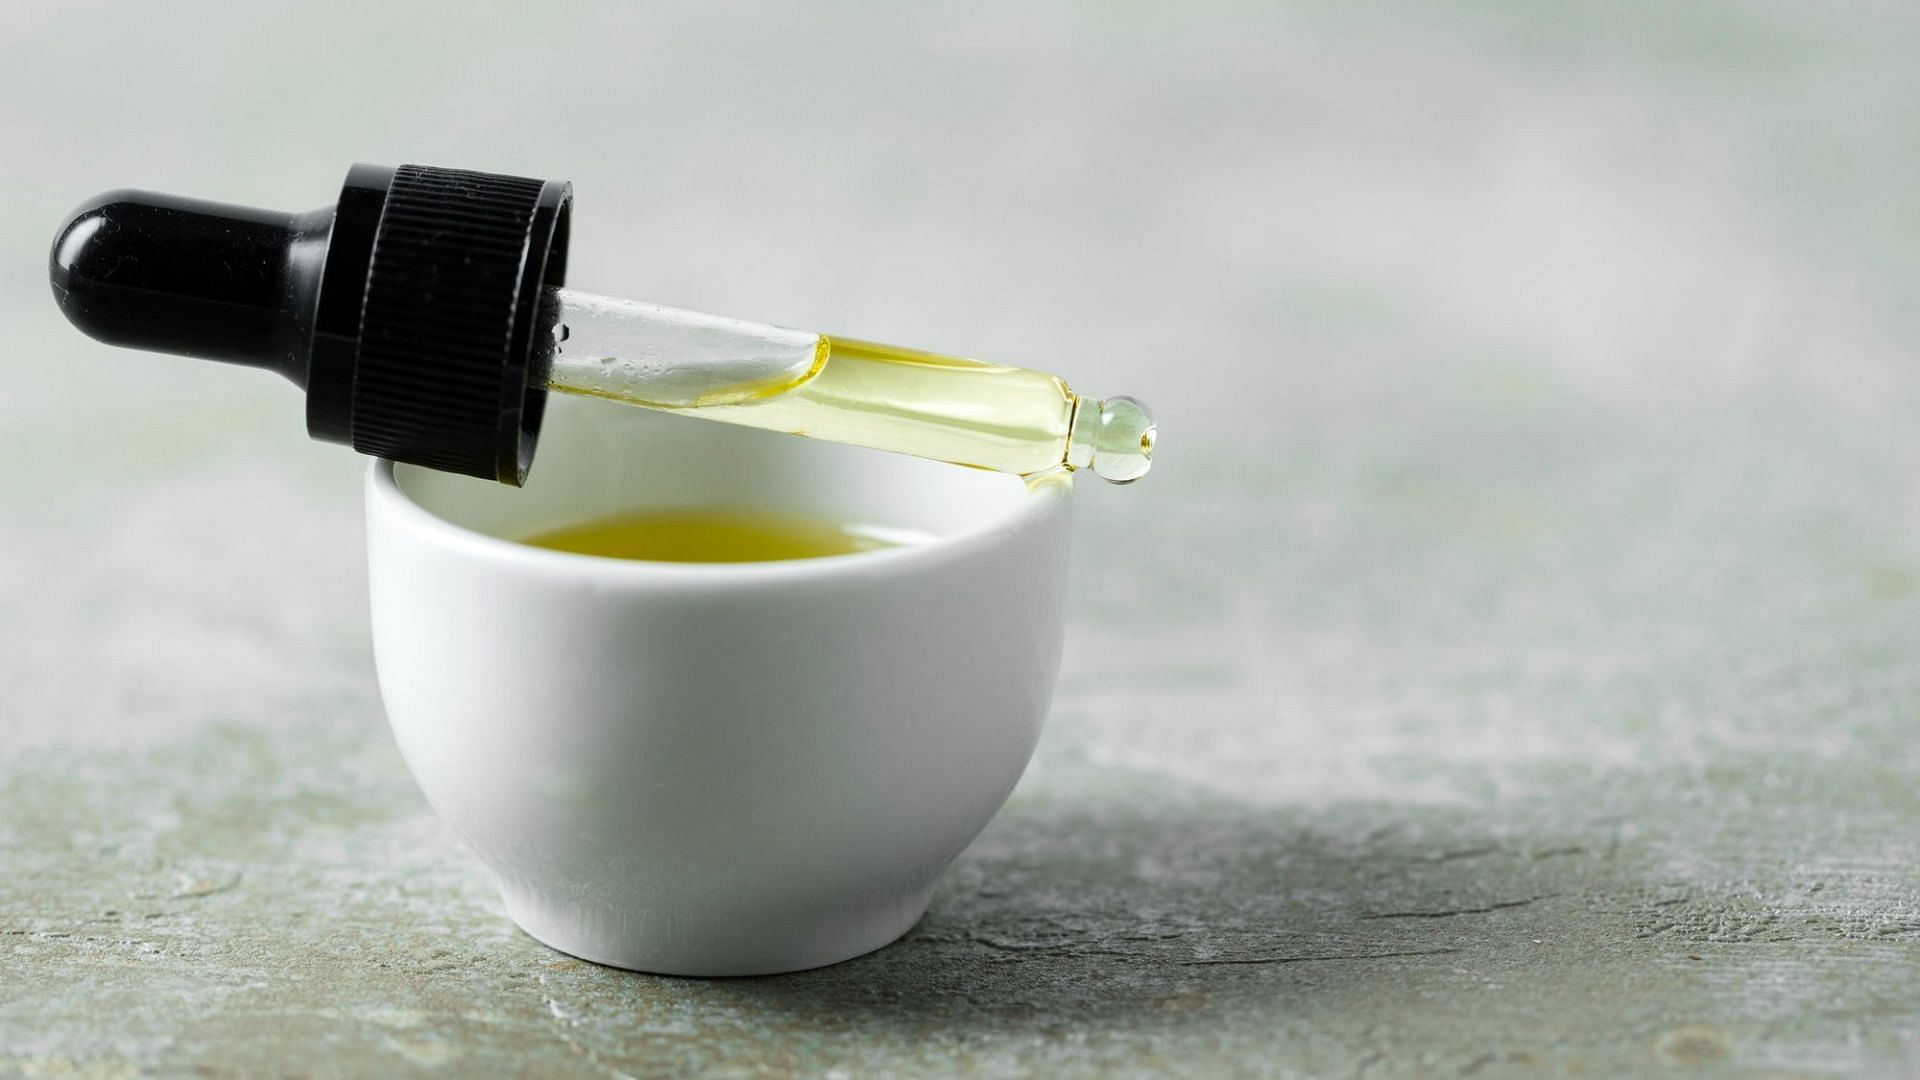 Tea Tree Oil originally is very concentrated and so, it should be used in highly diluted amount only as one of the home remedies for scabies (Image by Freepik on Freepik)